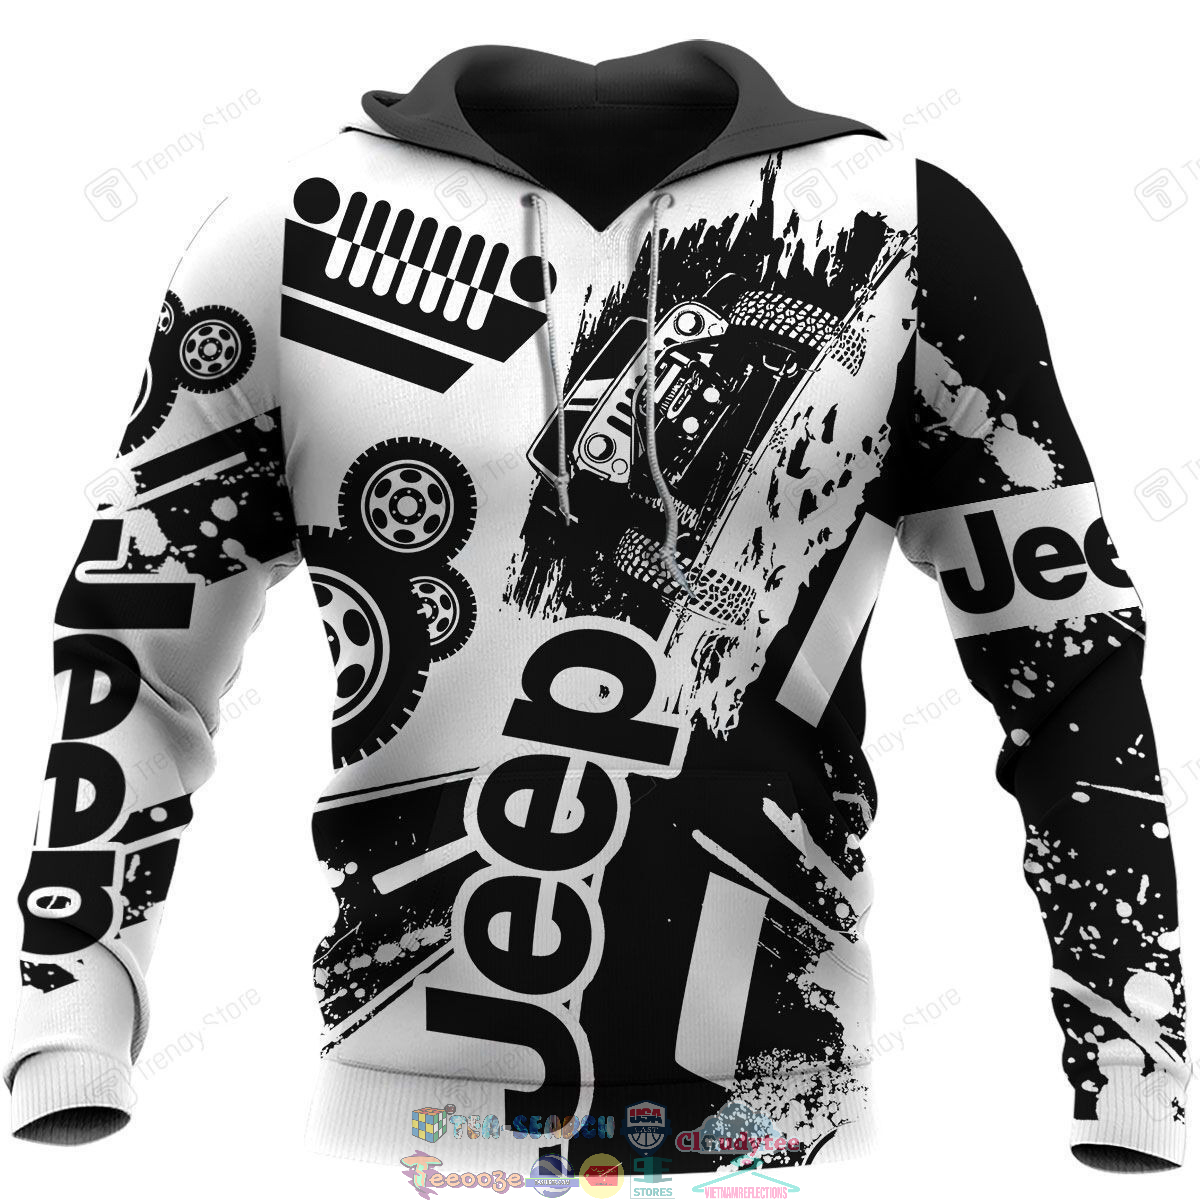 gjbCK3y8-TH050822-20xxxJeep-ver-4-3D-hoodie-and-t-shirt3.jpg